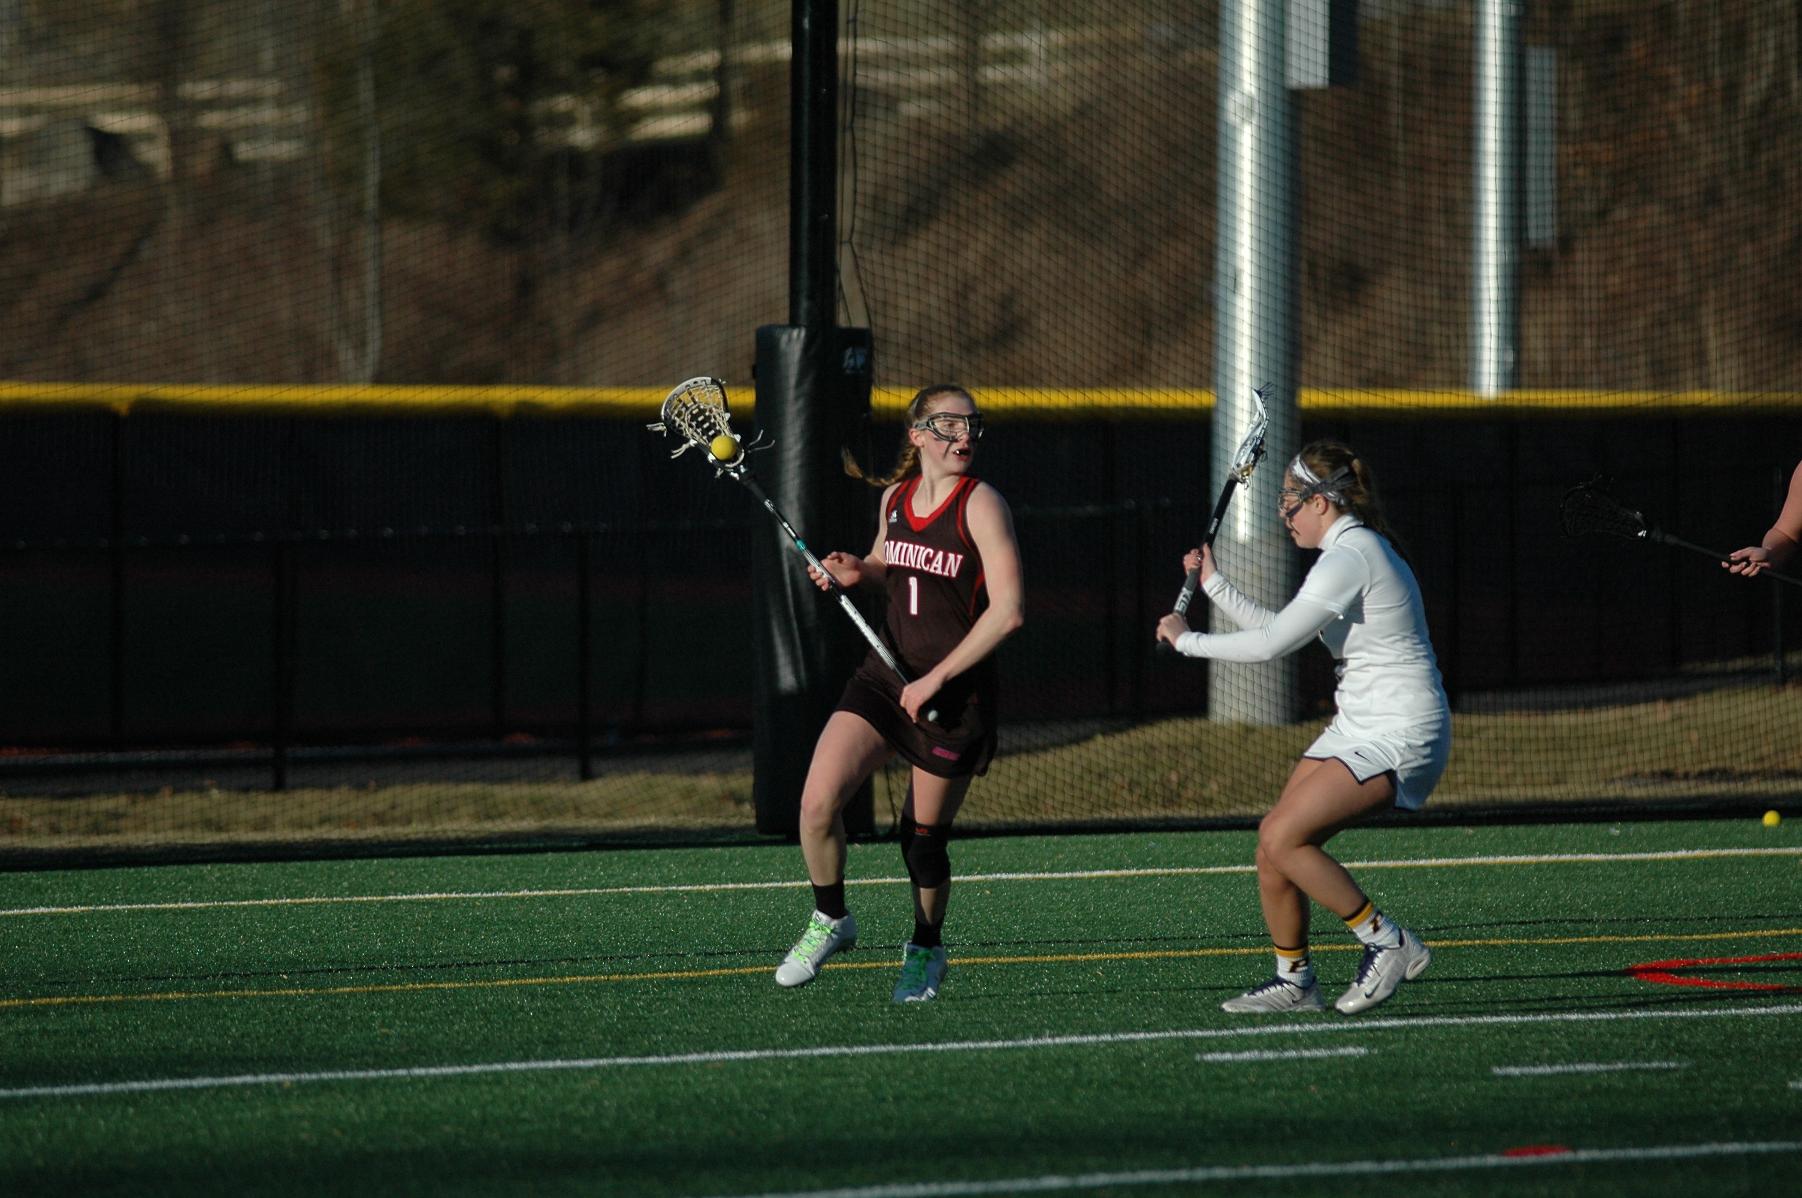 WOMEN'S LACROSSE REMAIN UNDEFEATED IN CONFERENCE PLAY